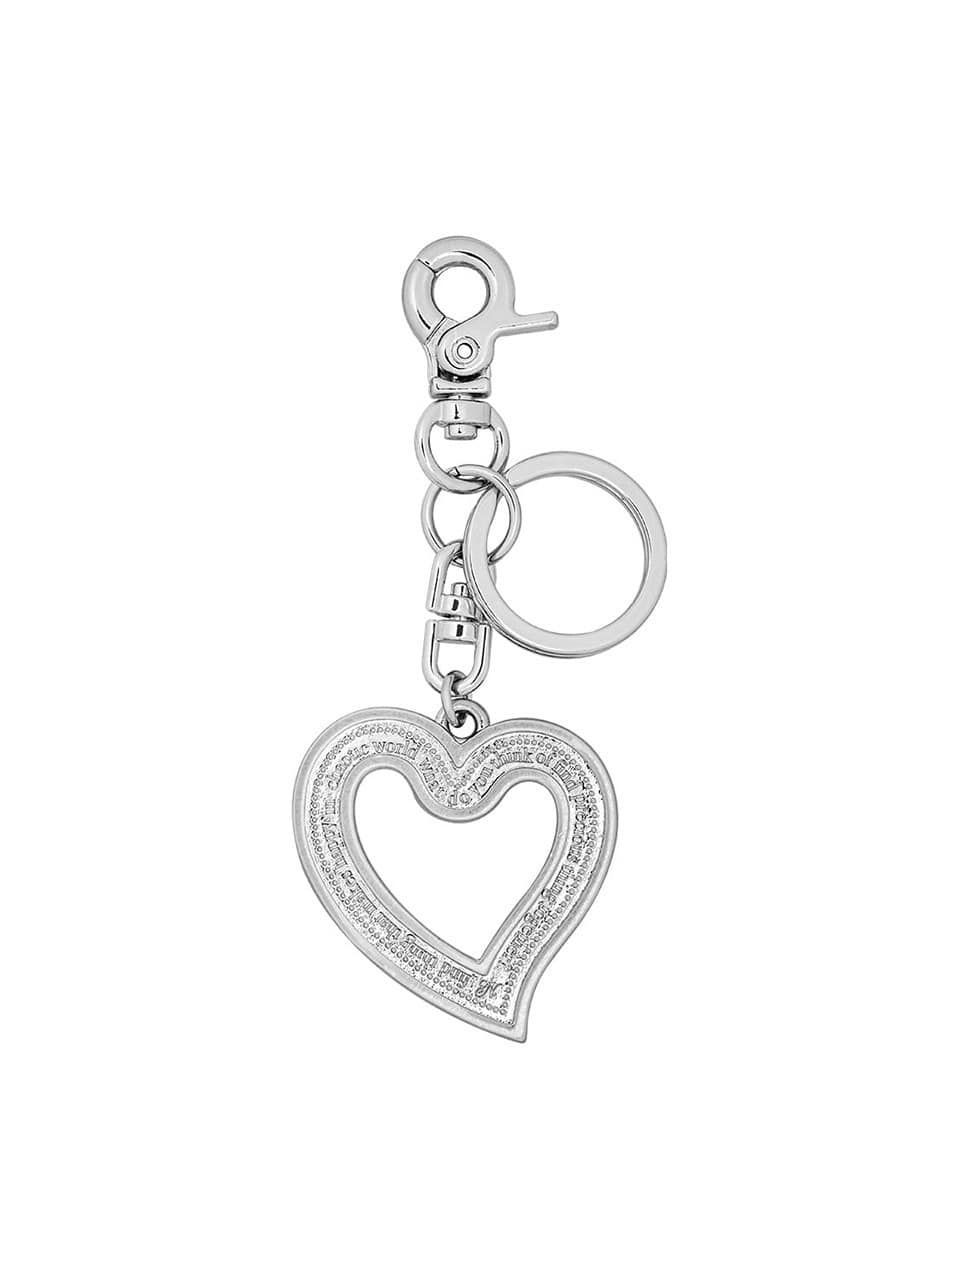 NFF - LETTERING HEART KEY RING (SILVER)